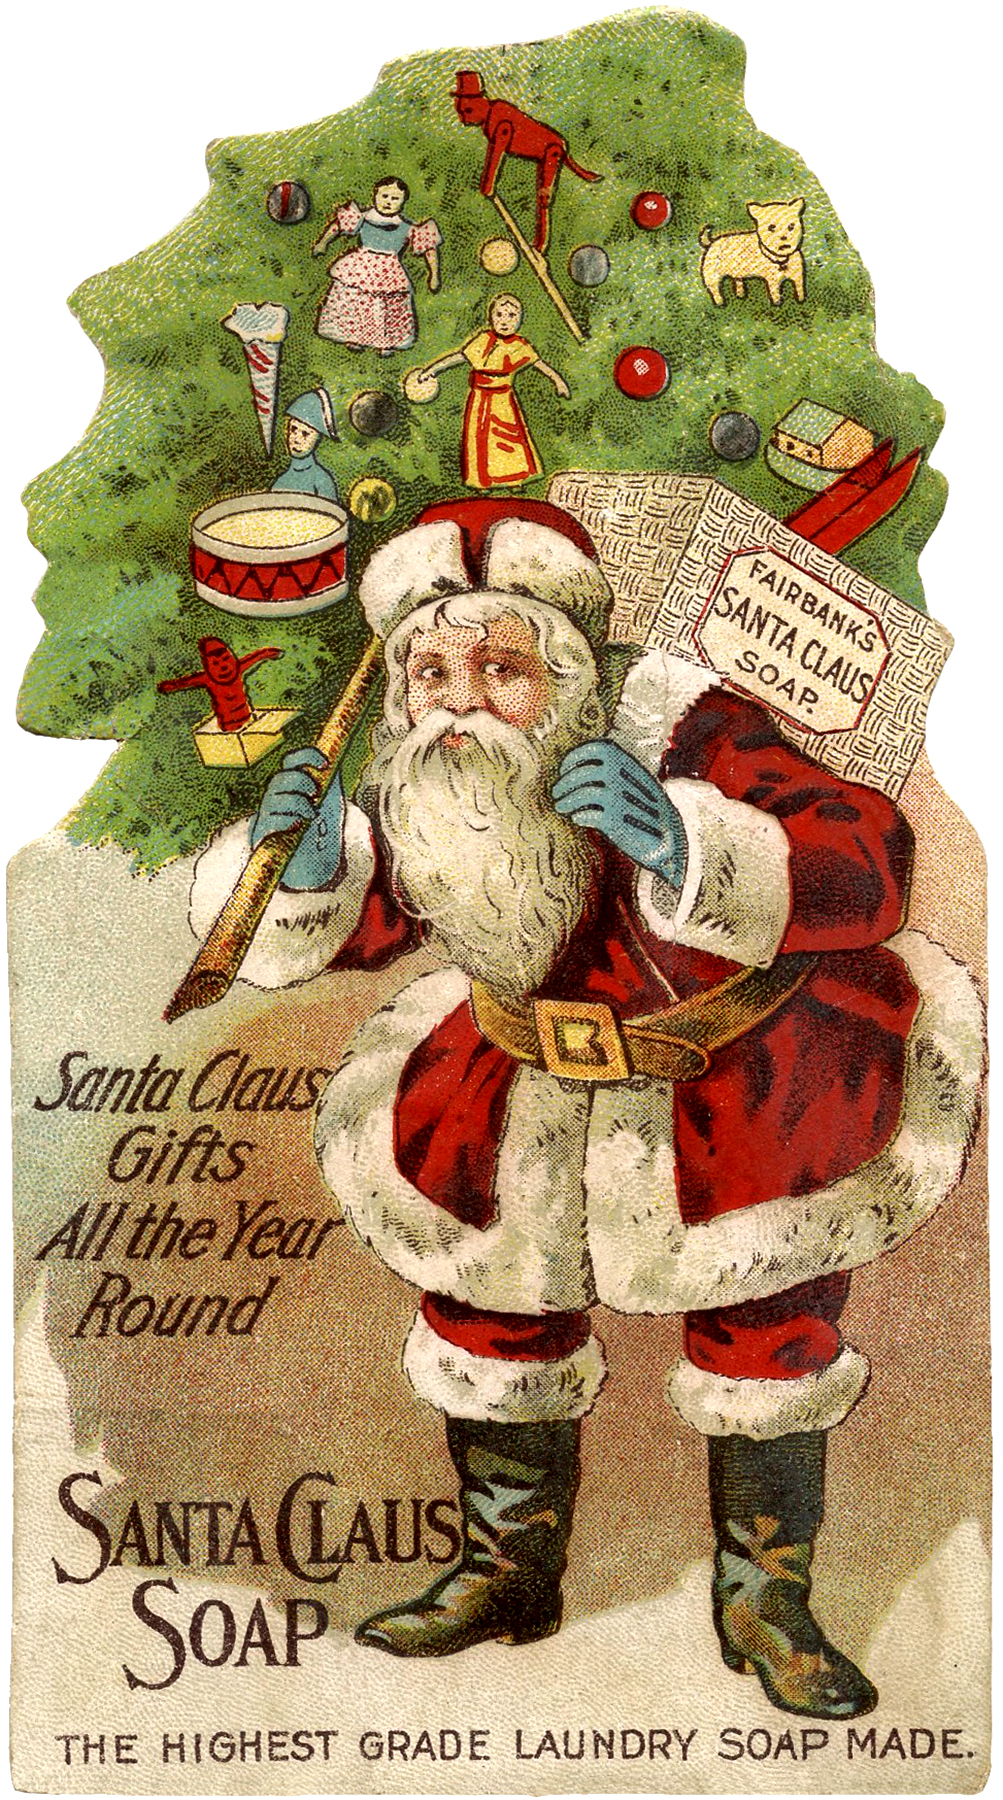 http://thegraphicsfairy.com/wp-content/uploads/2013/12/Santa-Clause-Soap-Ad-GraphicsFairy.jpg